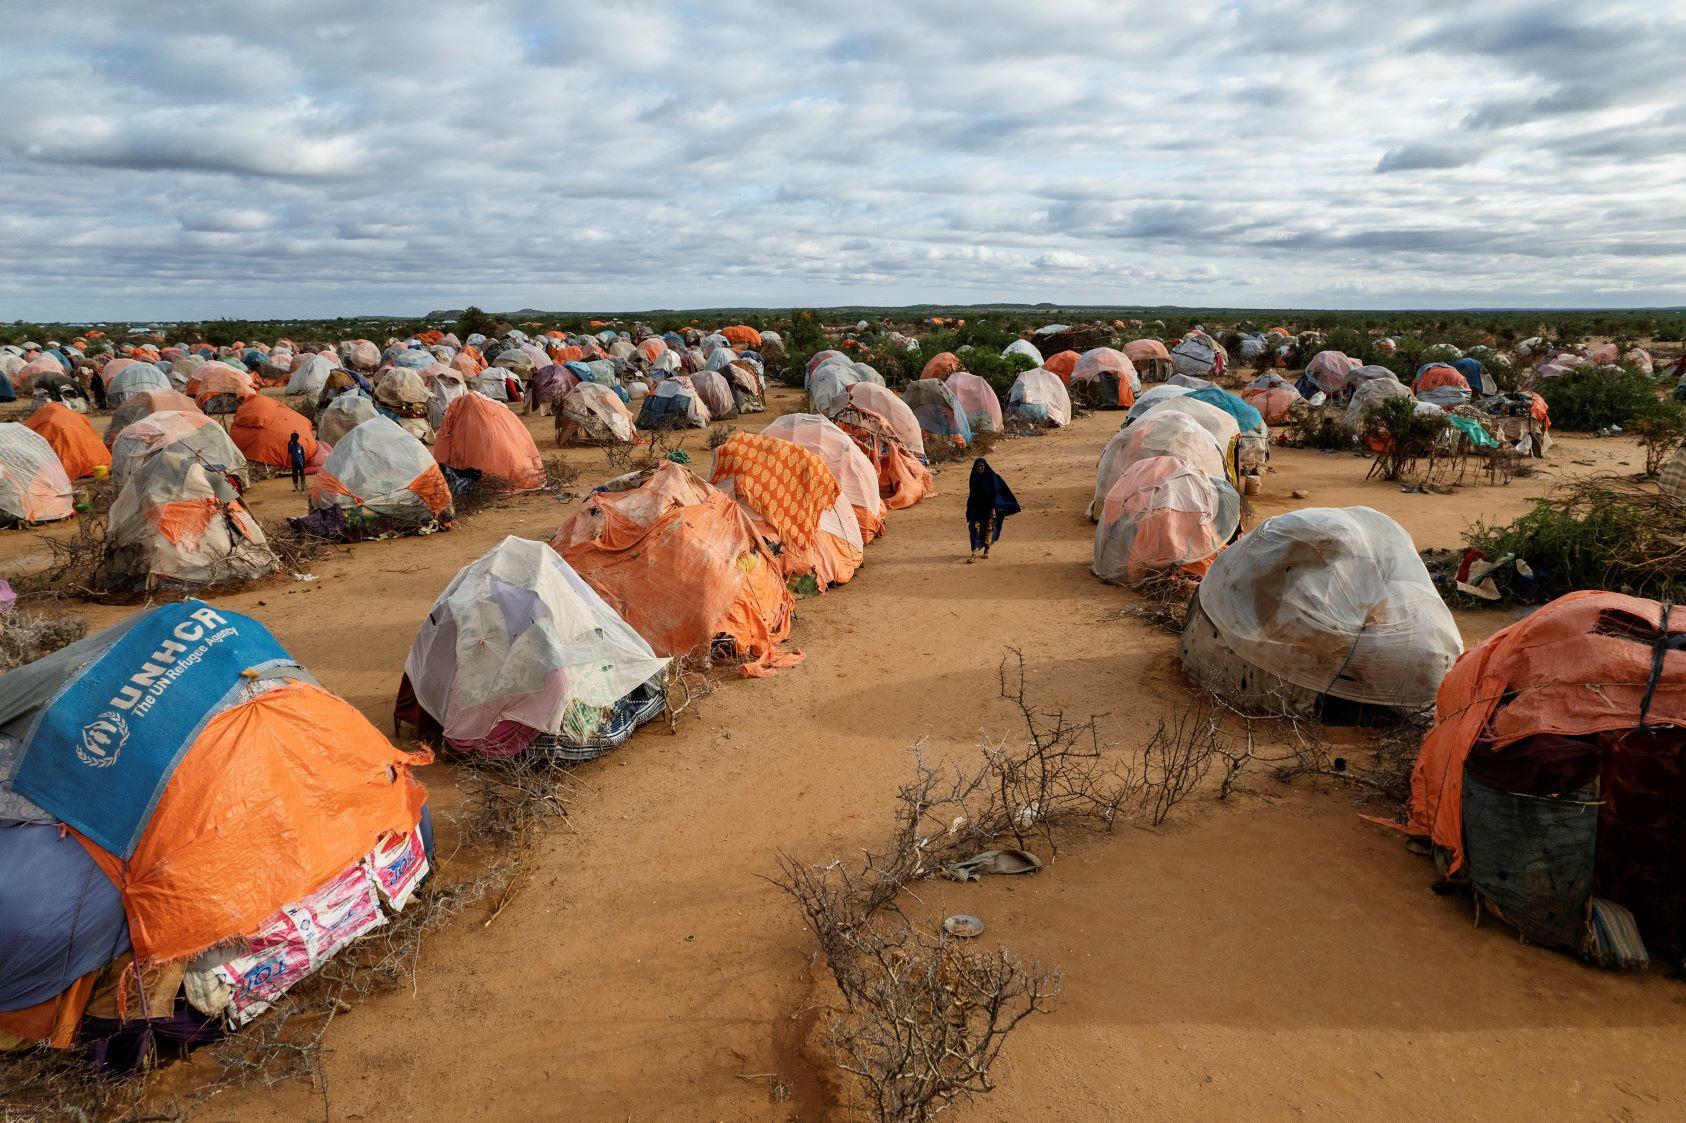 A newly constructed camp for people displaced by the country’s drought, in Doolow, Somalia, May 9, 2022. Somalia is facing its most severe drought in over three decades. (Malin Fezehai/The New York Times)